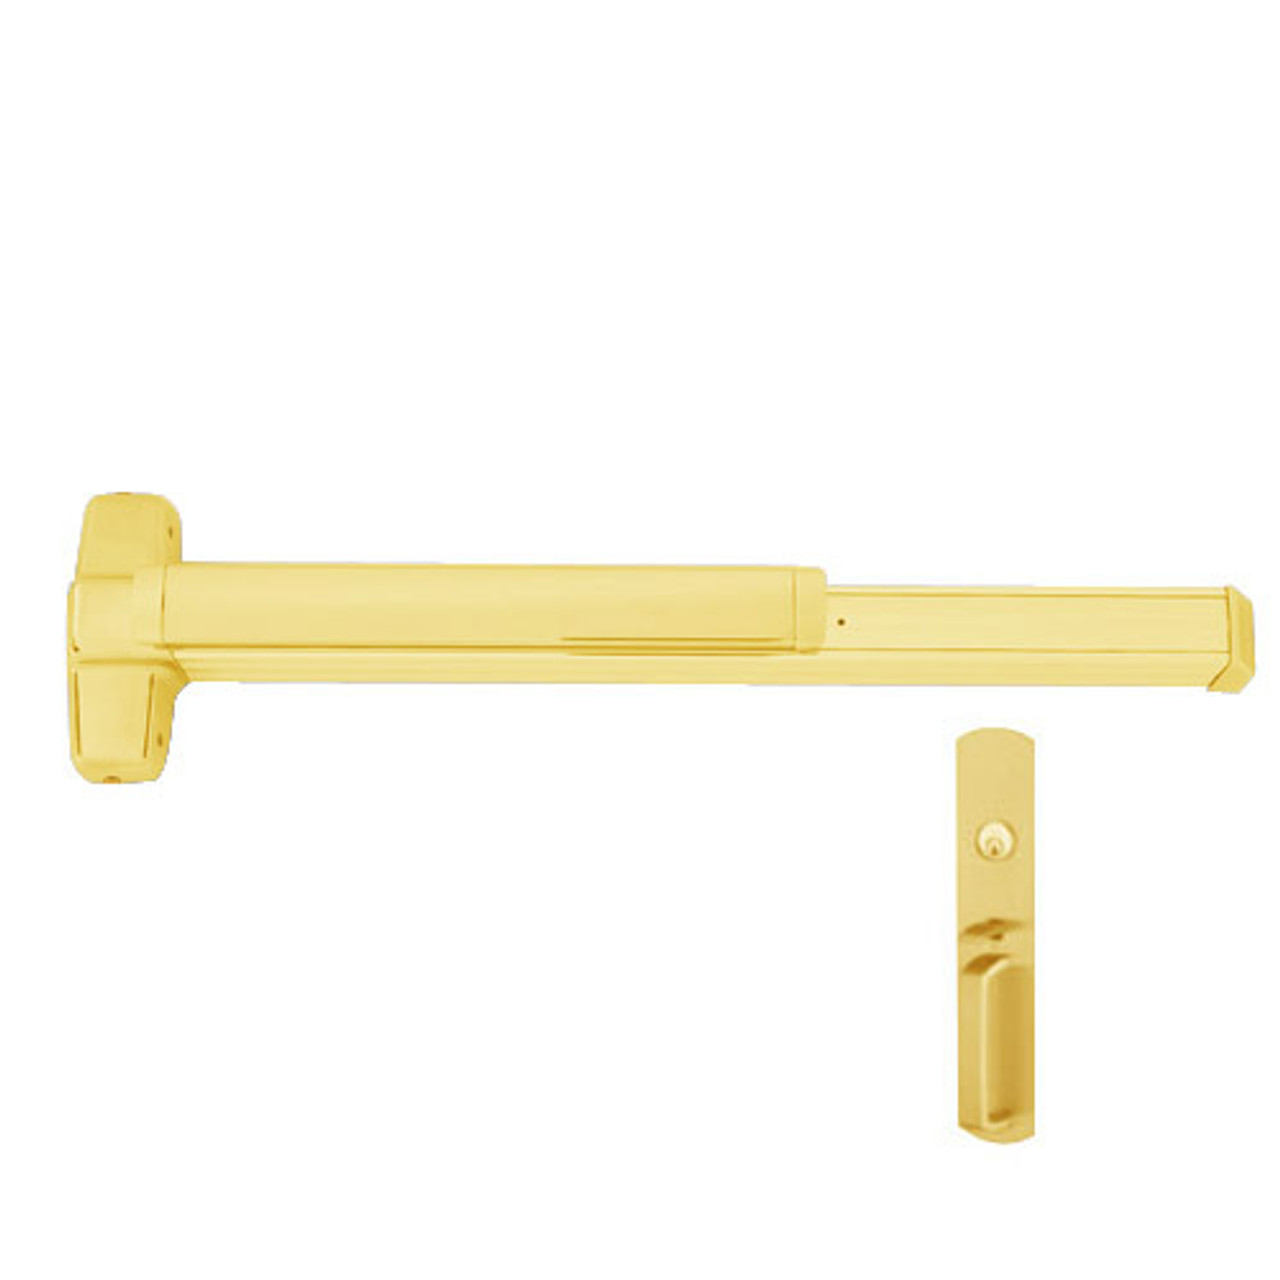 QEL9847WDC-TP-US3-4 Von Duprin Exit Device with Quiet Electric Latch in Bright Brass